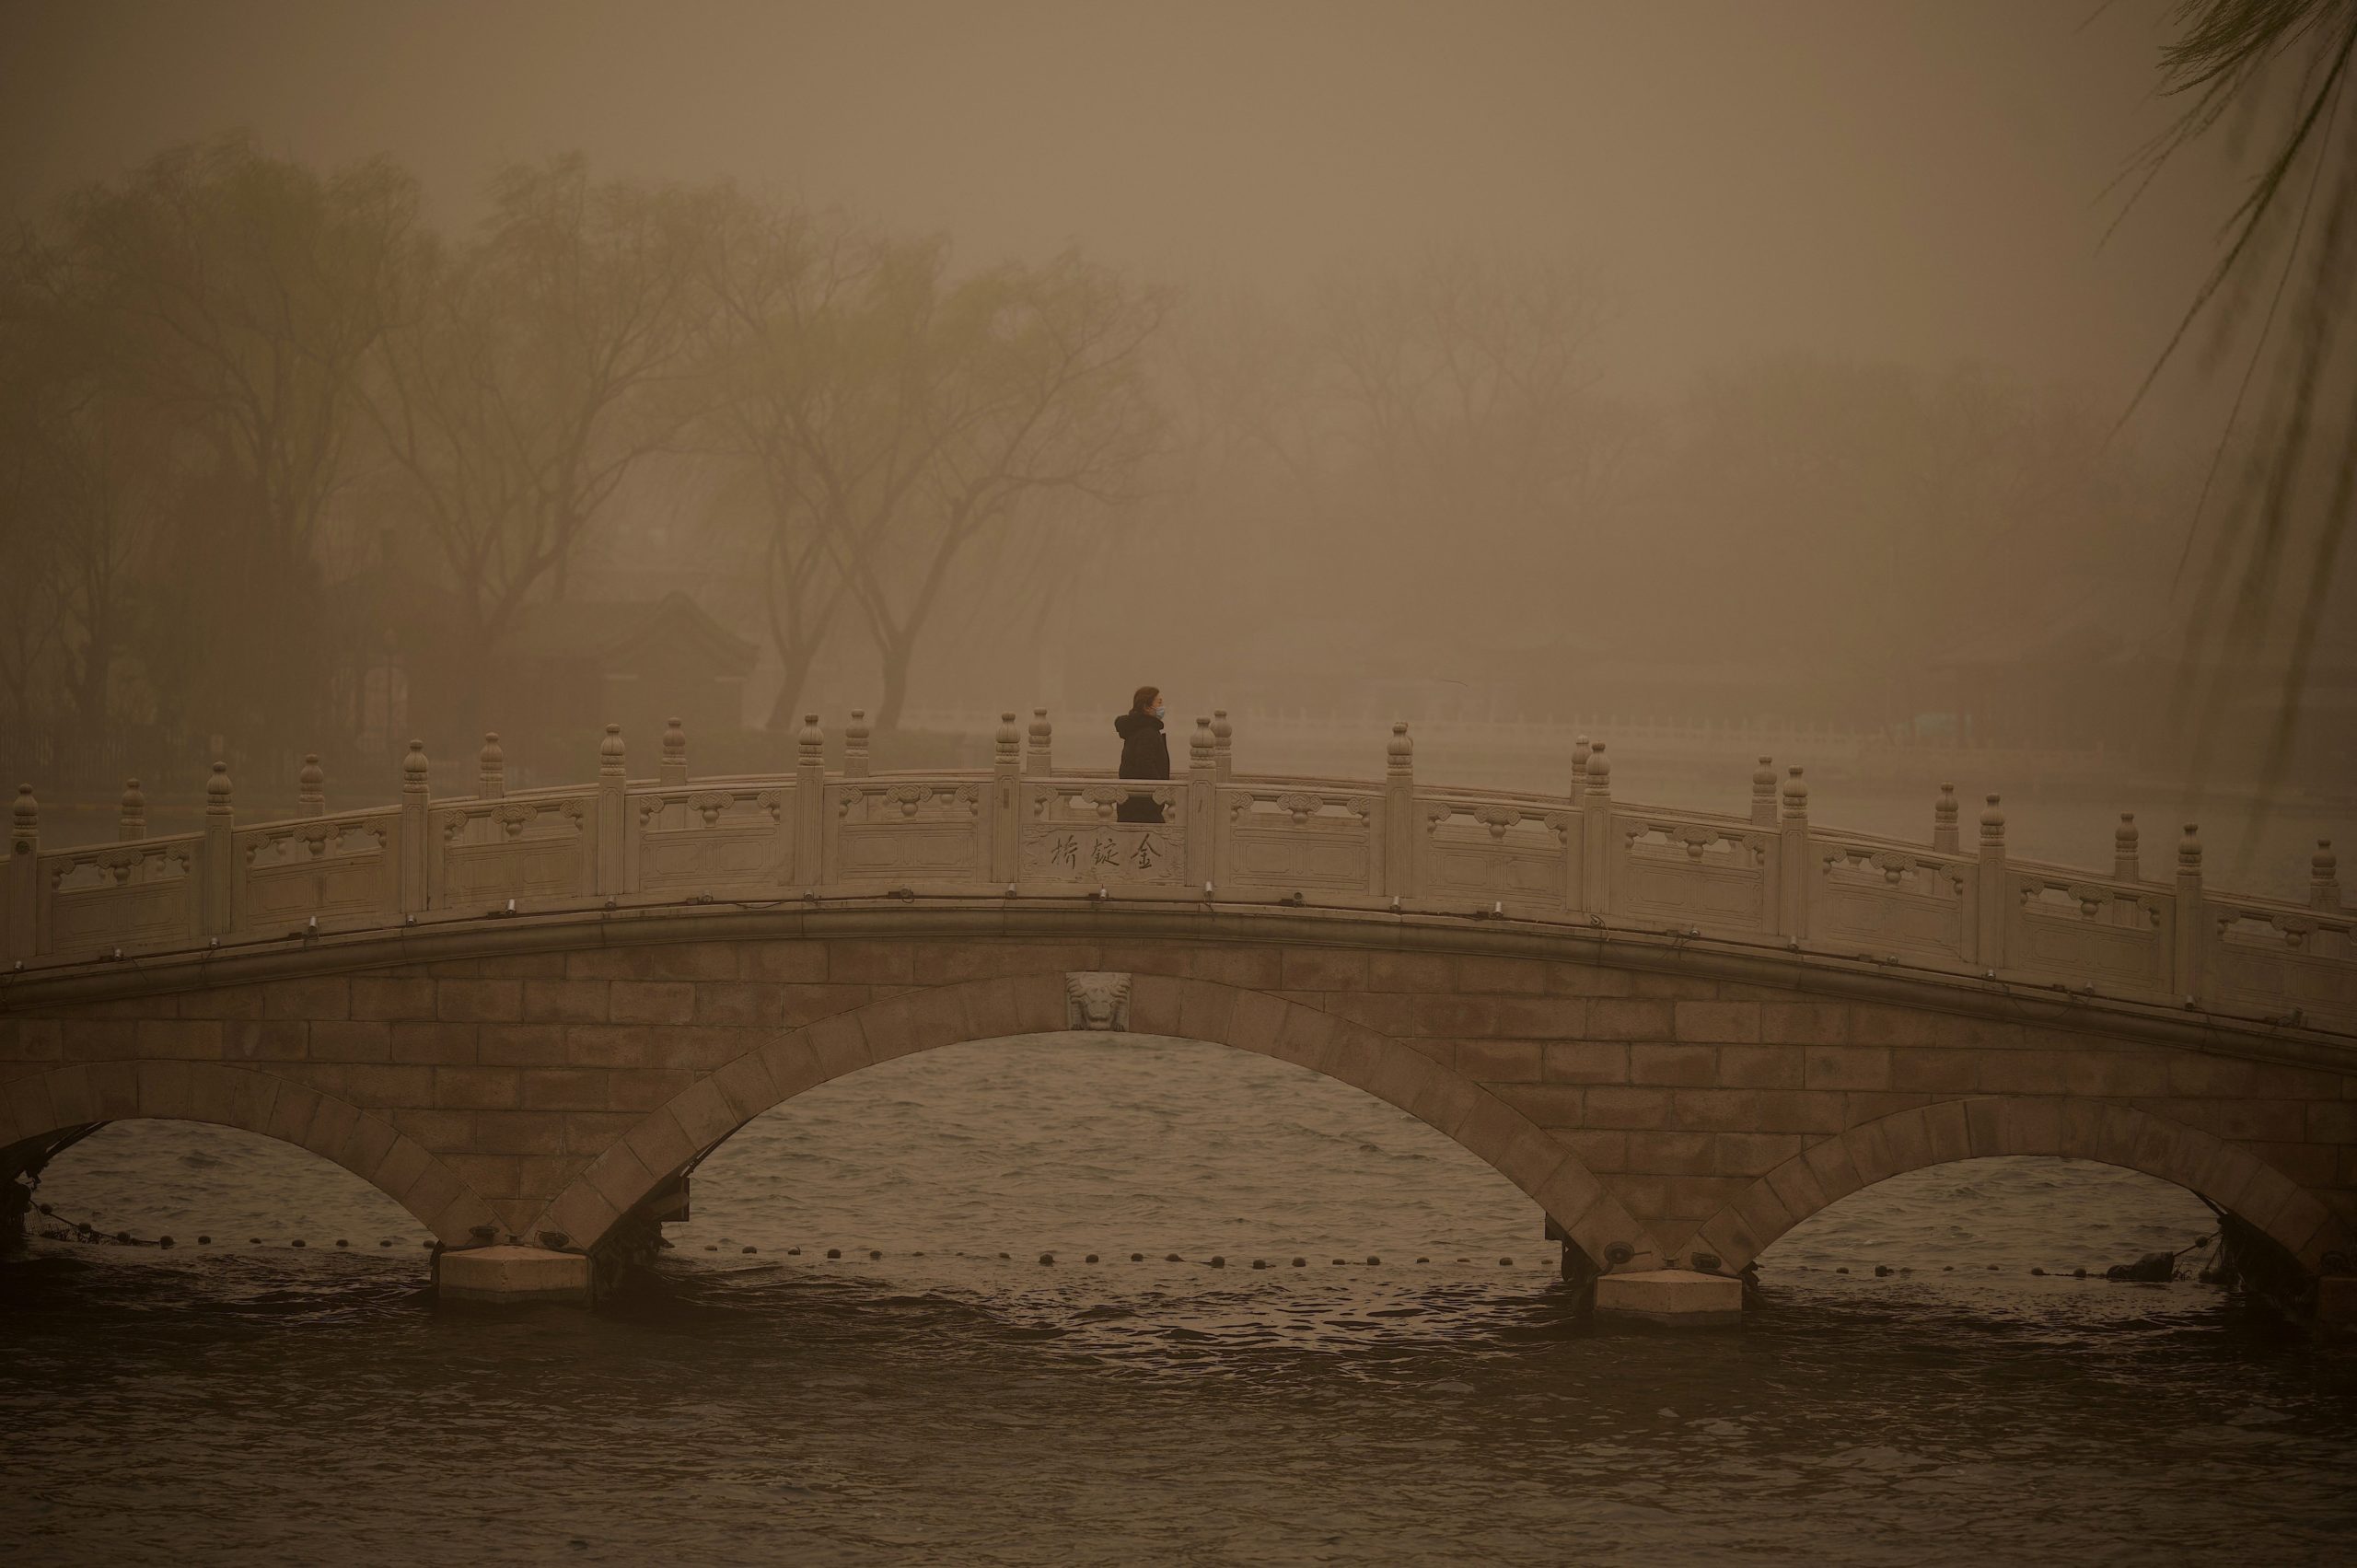 A woman crosses a bridge at Houhai lake during a sandstorm in Beijing on March 15, 2021. (Photo by Noel Celis / AFP) (Photo by NOEL CELIS/AFP via Getty Images)